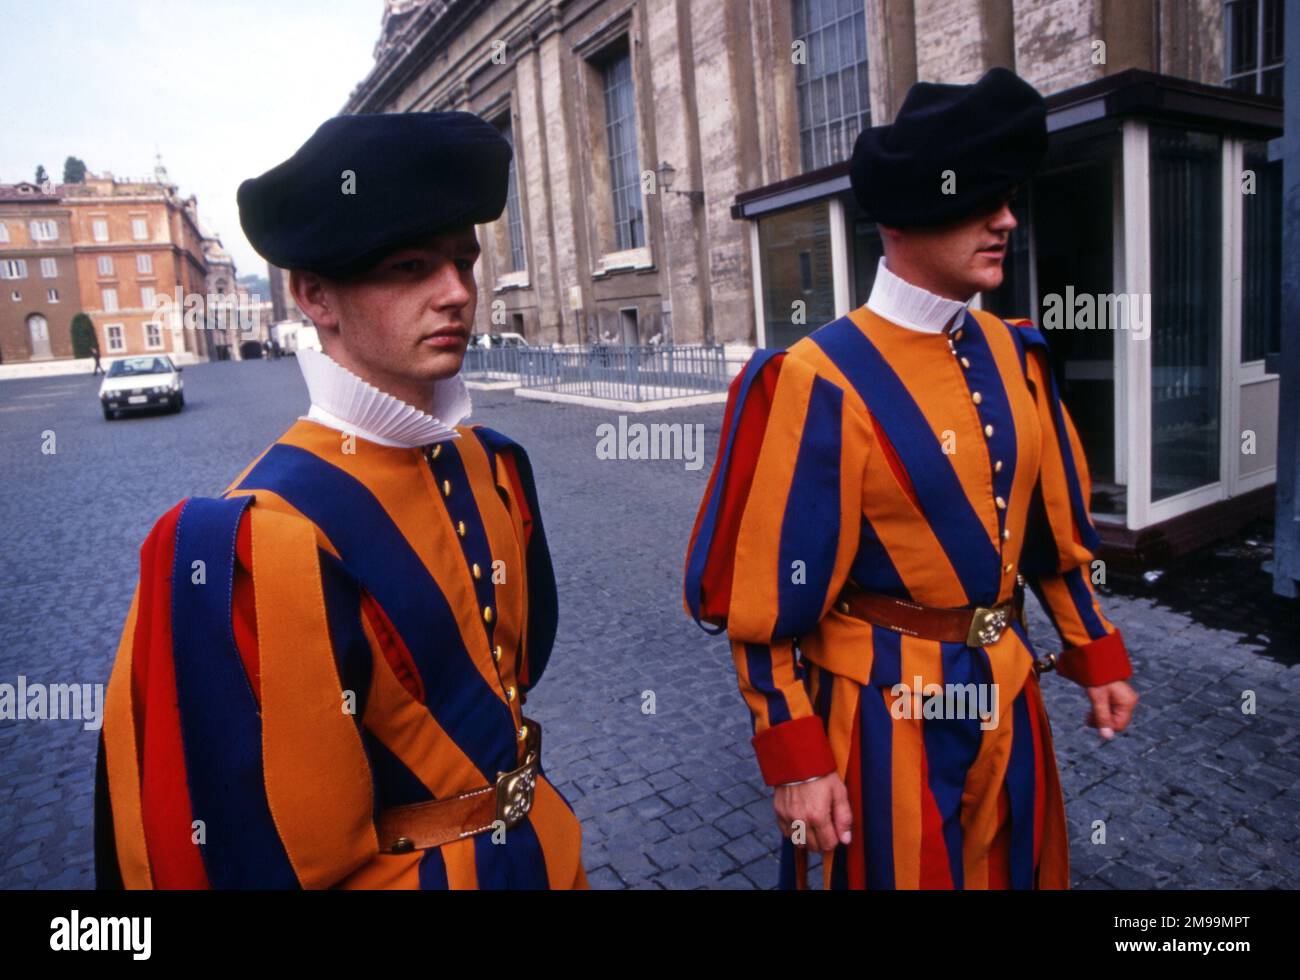 Two Pontifical Swiss Guards stand in Vatican City in Rome, Italy. They wear colorful Renaissance-era uniforms of blue, yellow and red Stock Photo